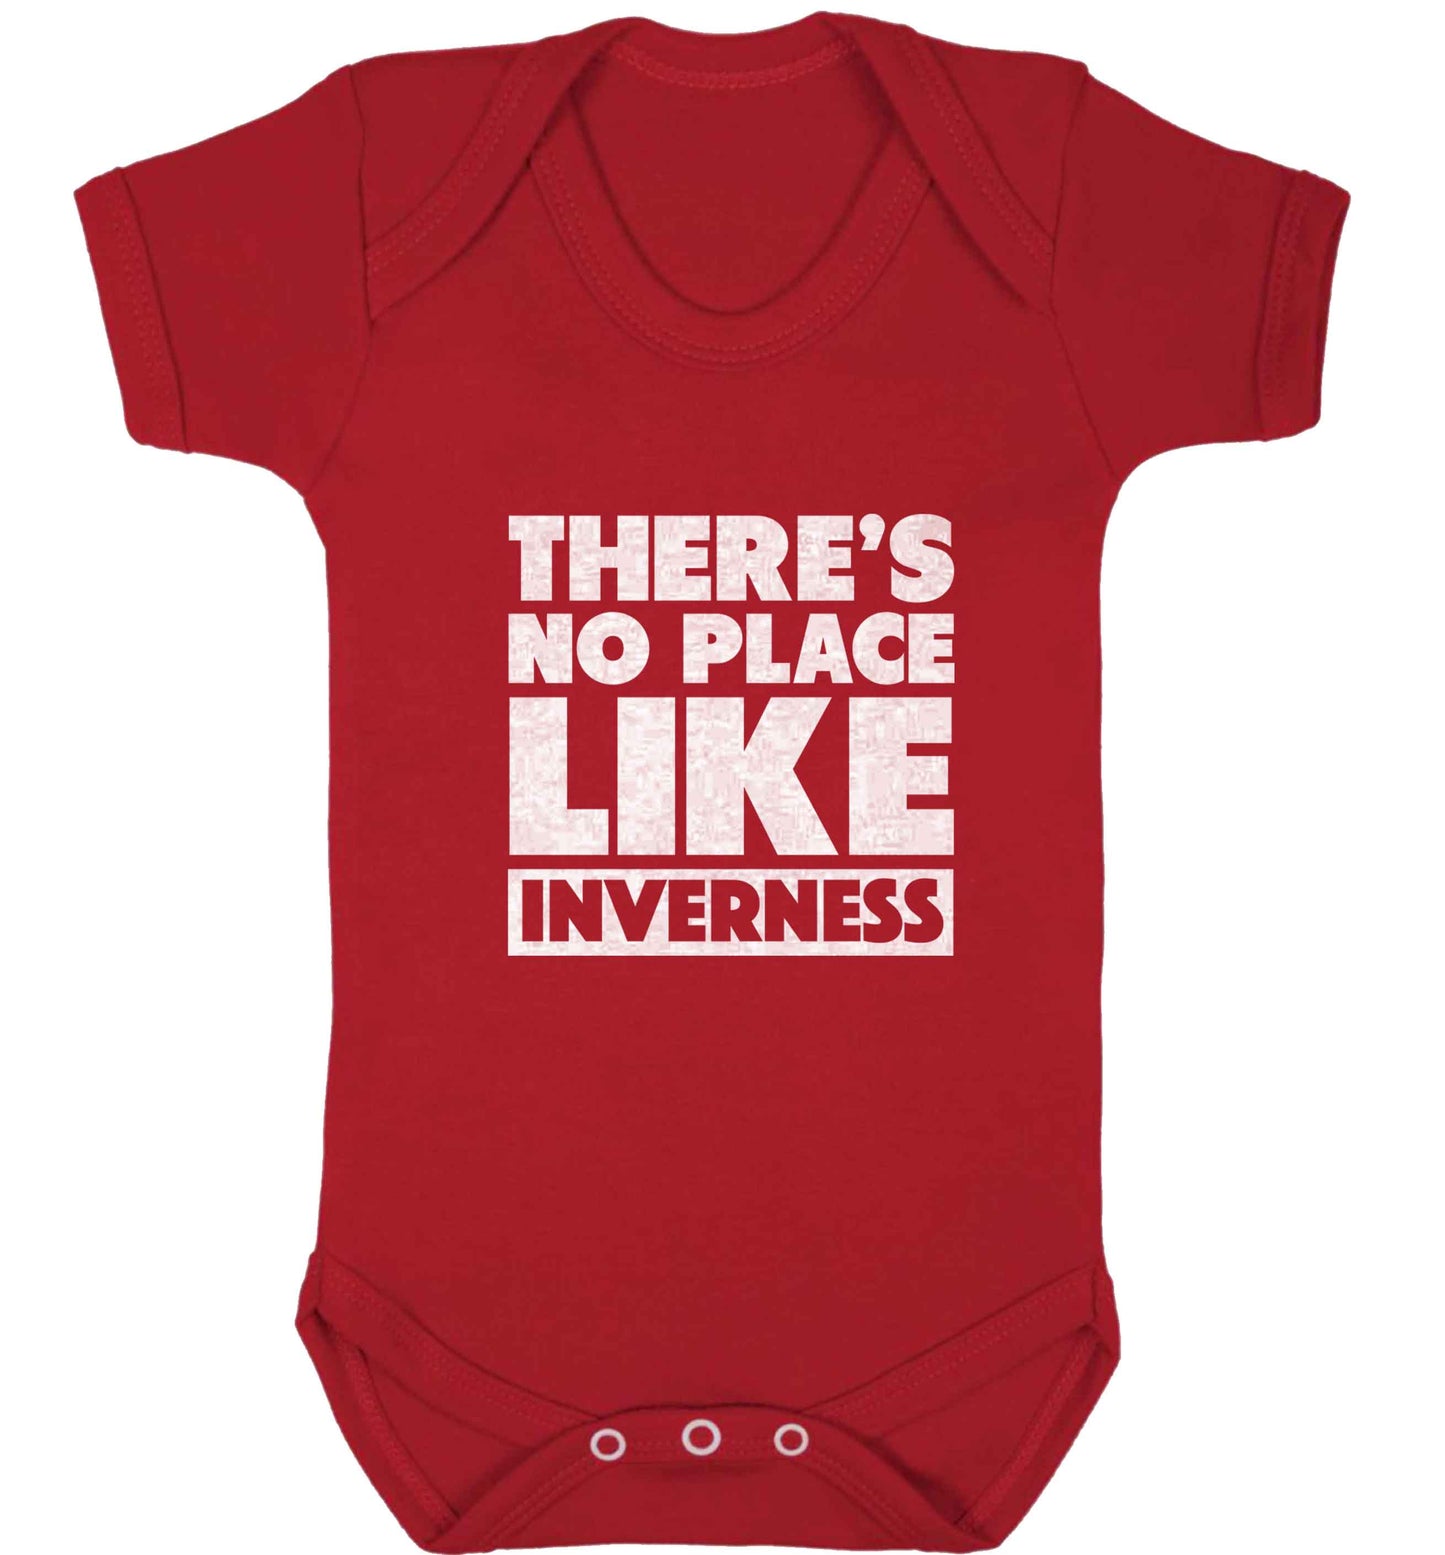 There's no place like Inverness baby vest red 18-24 months